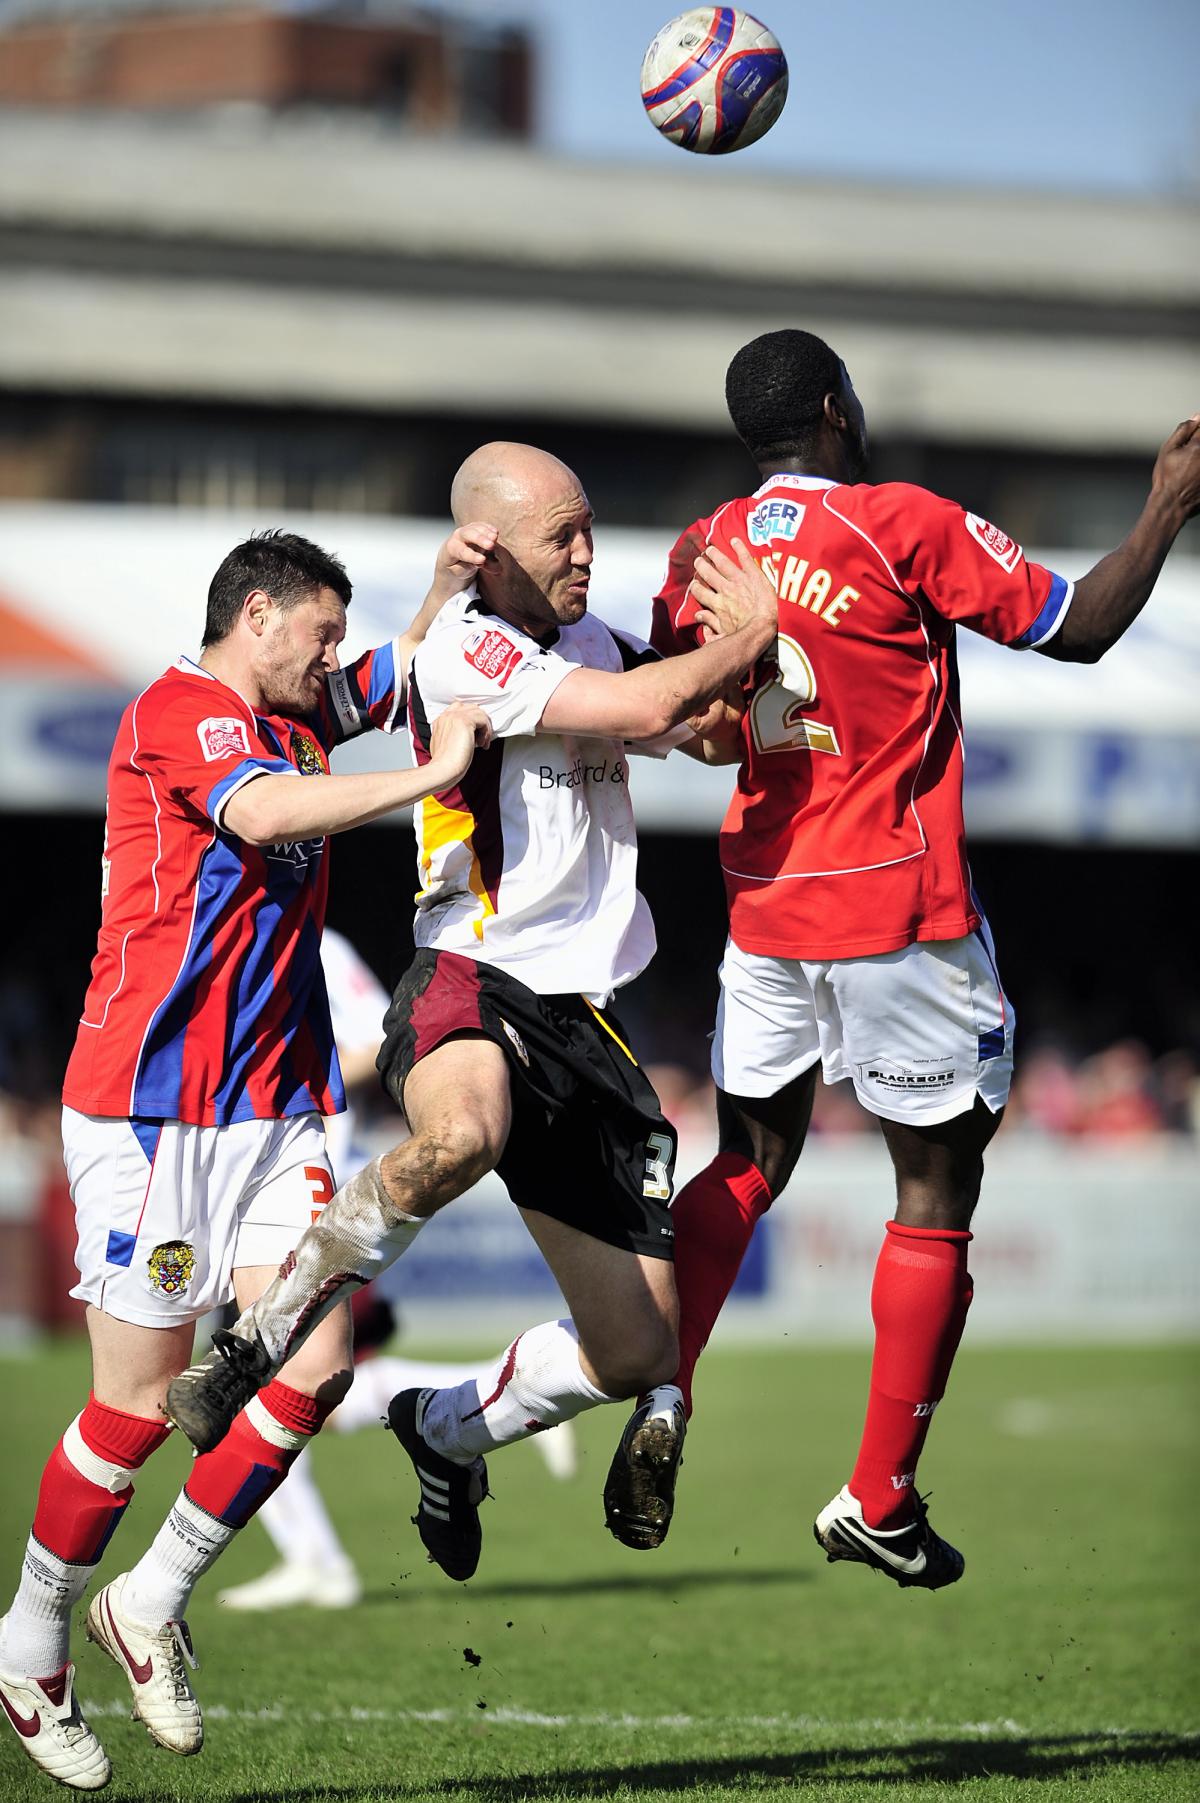 Match pictures from City's game against Dagenham